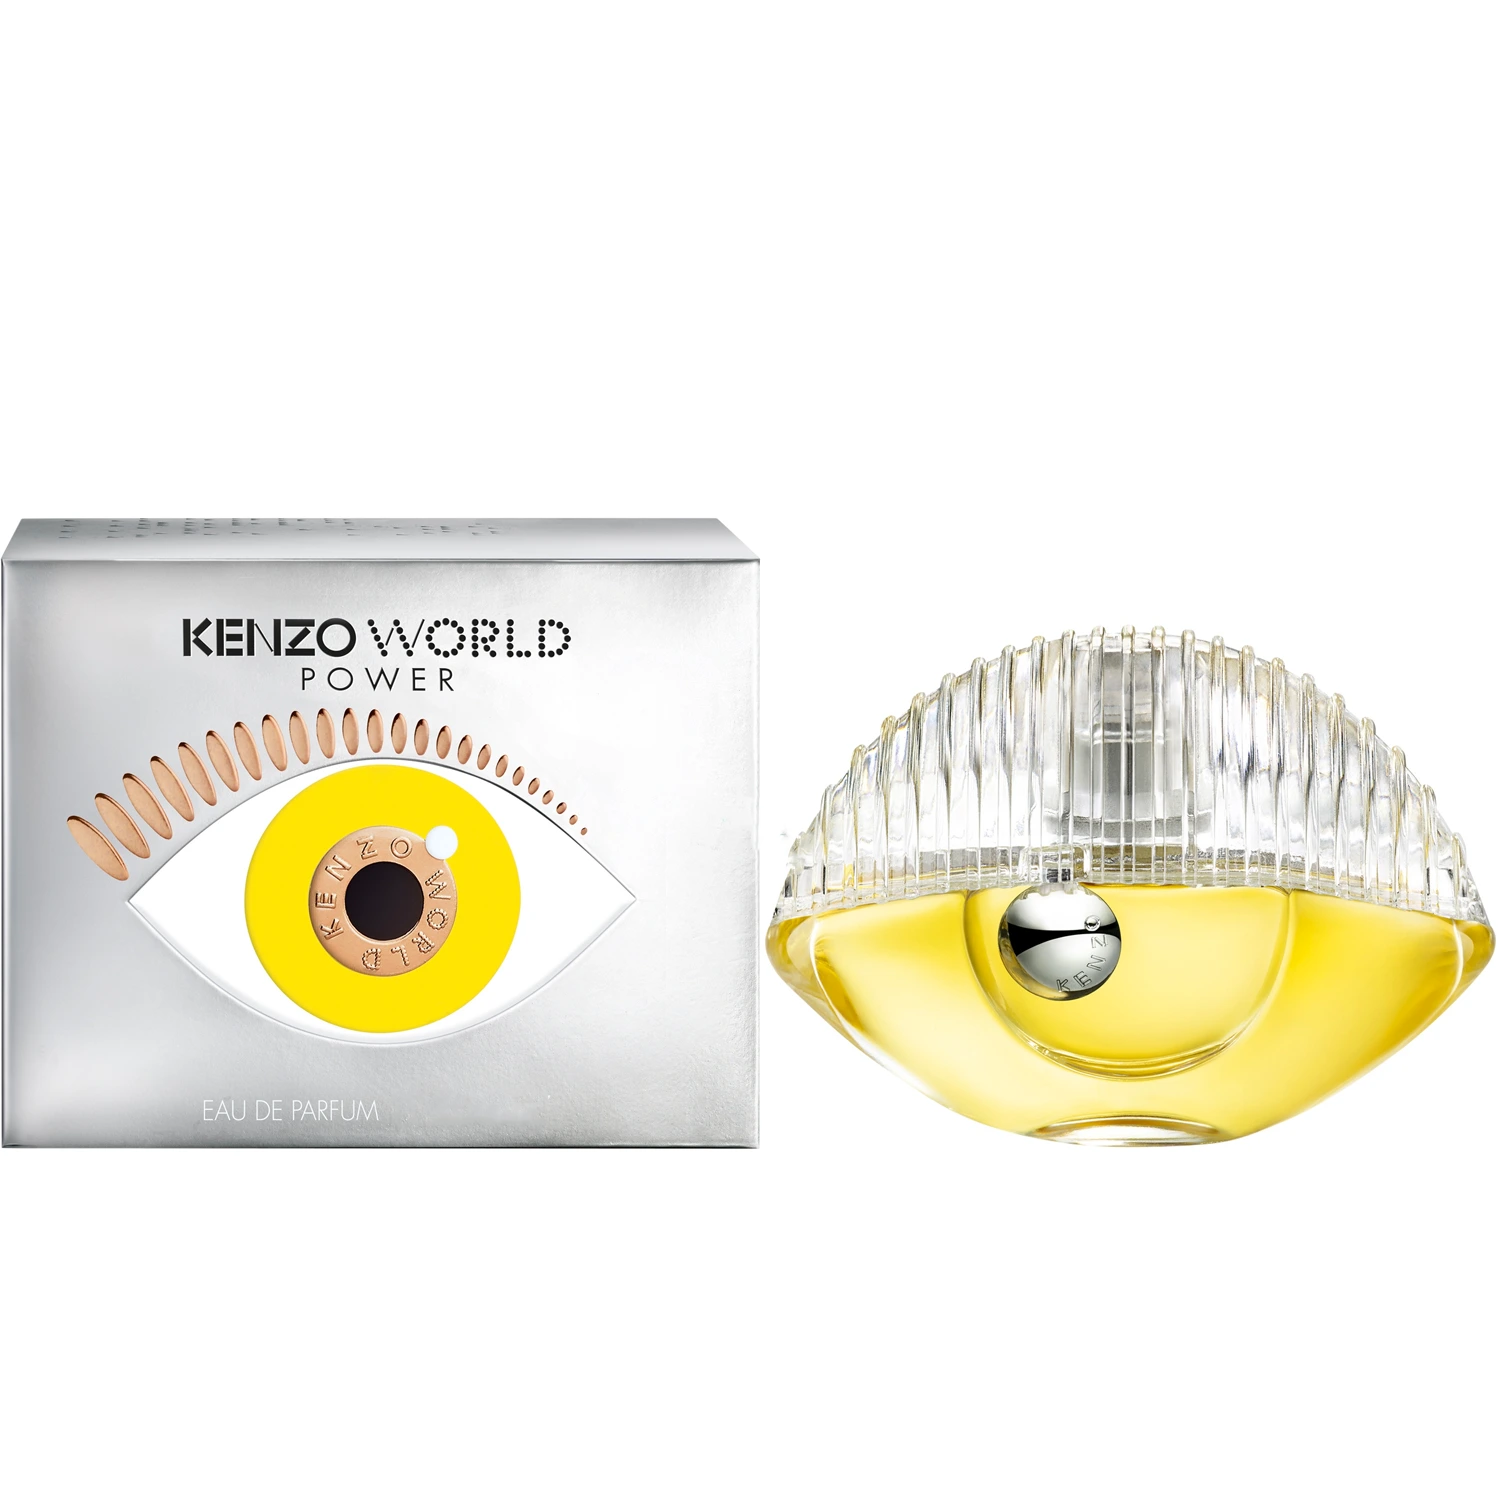 <p>Kenzo World Power is a bewitchingly fresh EDP that captures the wild essence of the seaside. Cypress and sea salt give a light, woody aroma, while tonka bean adds a dash of sweet spice. Make an impact with this eye-catching, buttery yellow elixir and experience long-lasting fragrance. Who said power has to be dull?</p>